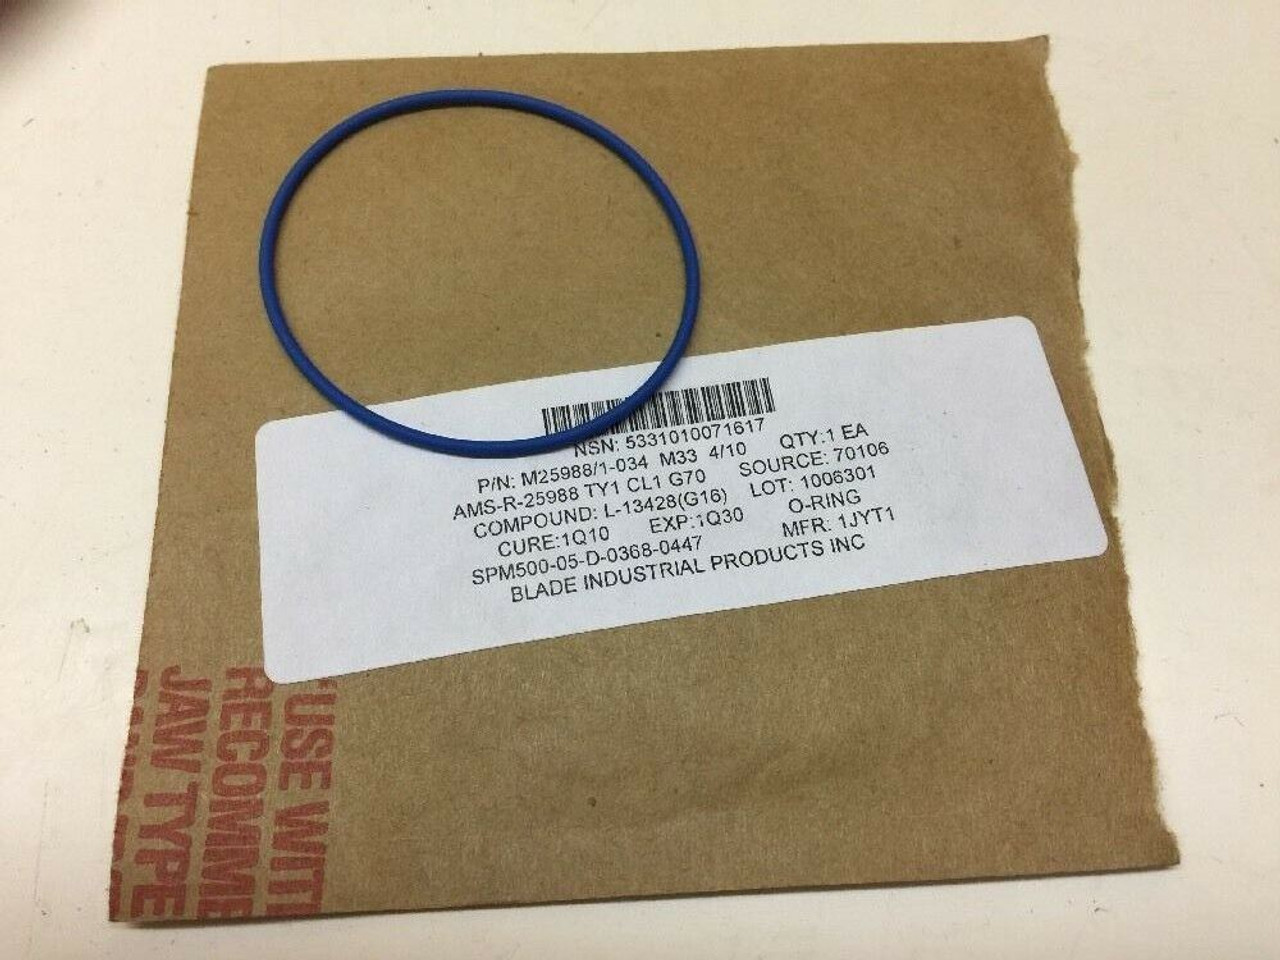 Blue Rubber O-Ring Seal M25988/1-034 Blade Industrial